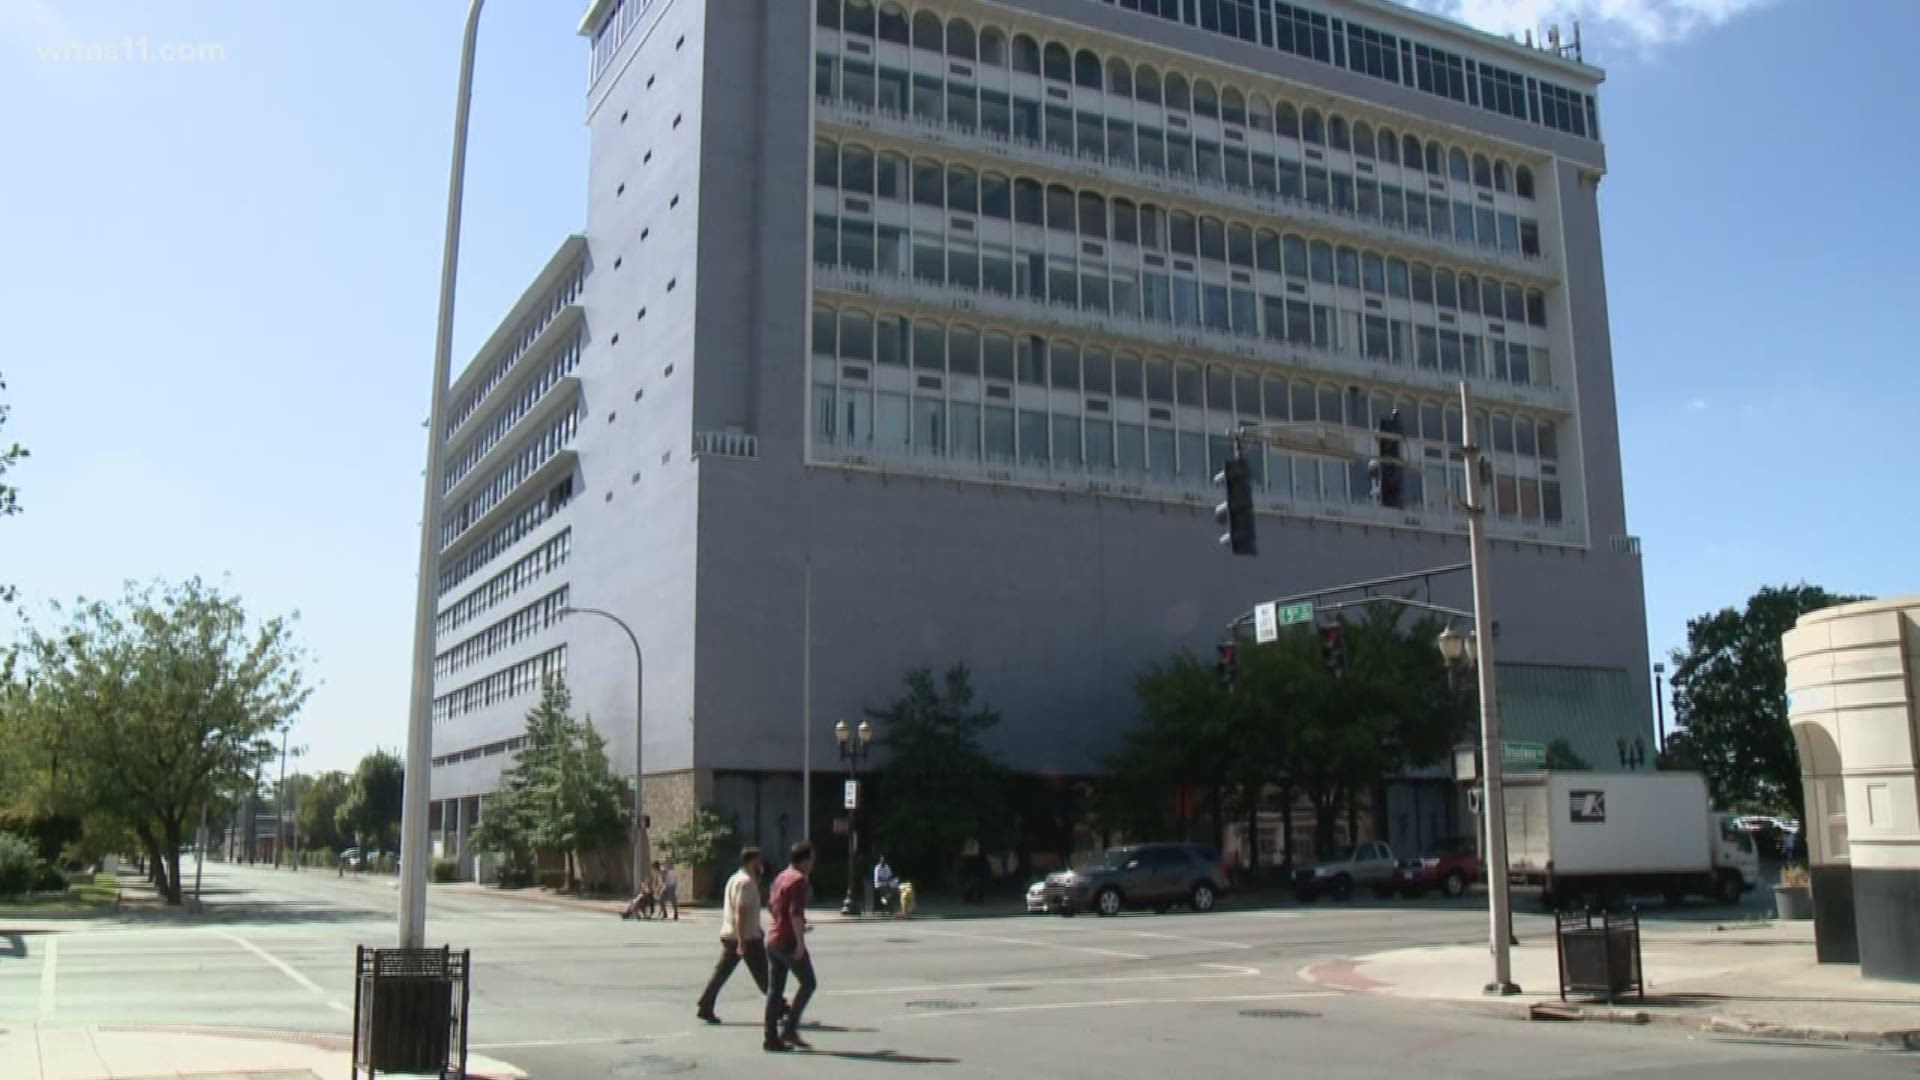 A Louisville architectural firm wants to transform the building into a 195-room hotel.